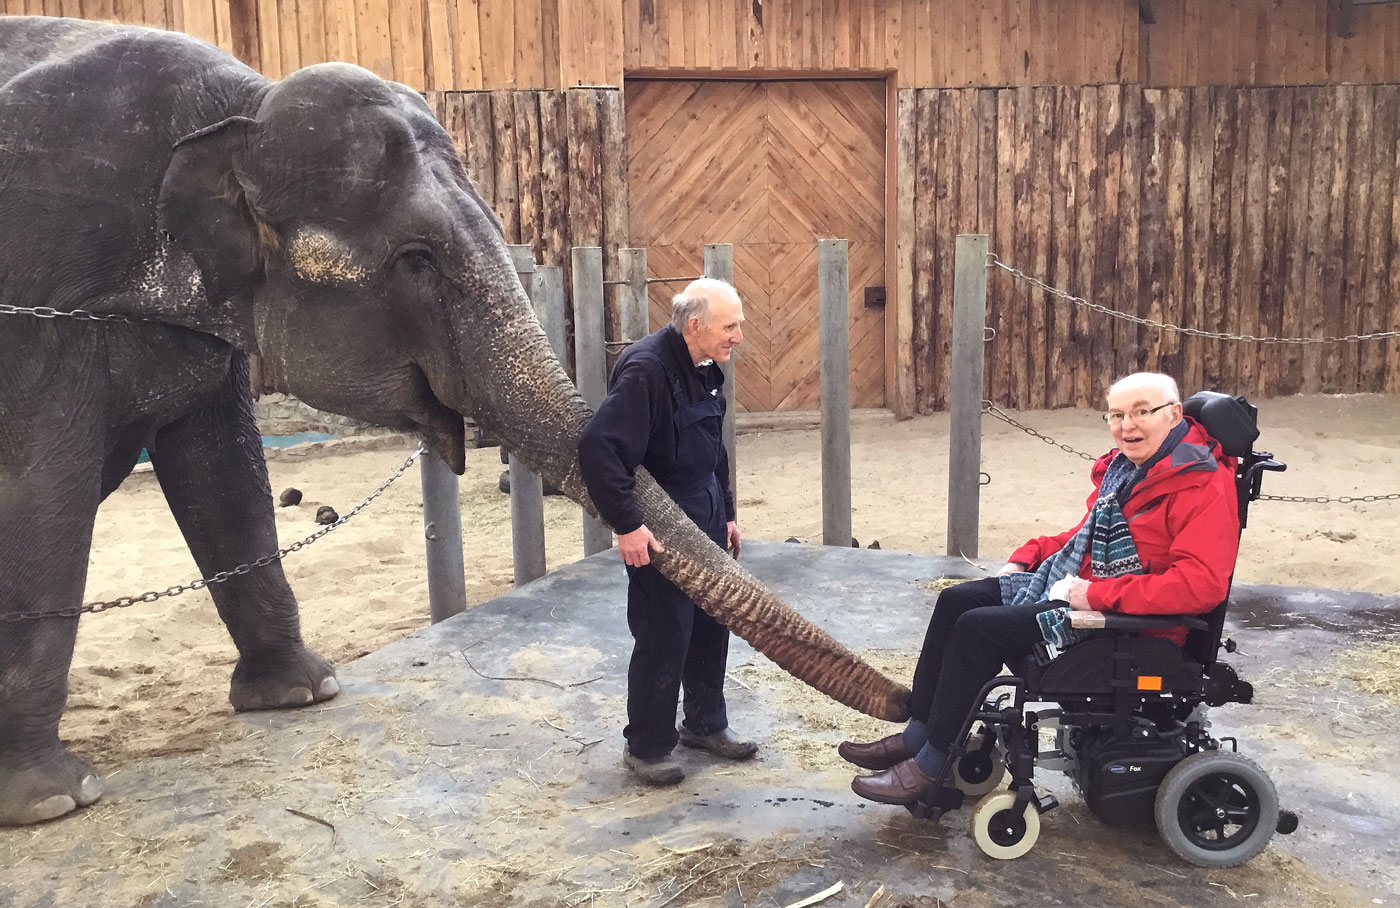 A patient at Skanda Vale Hospice meets Valli the temple elephant